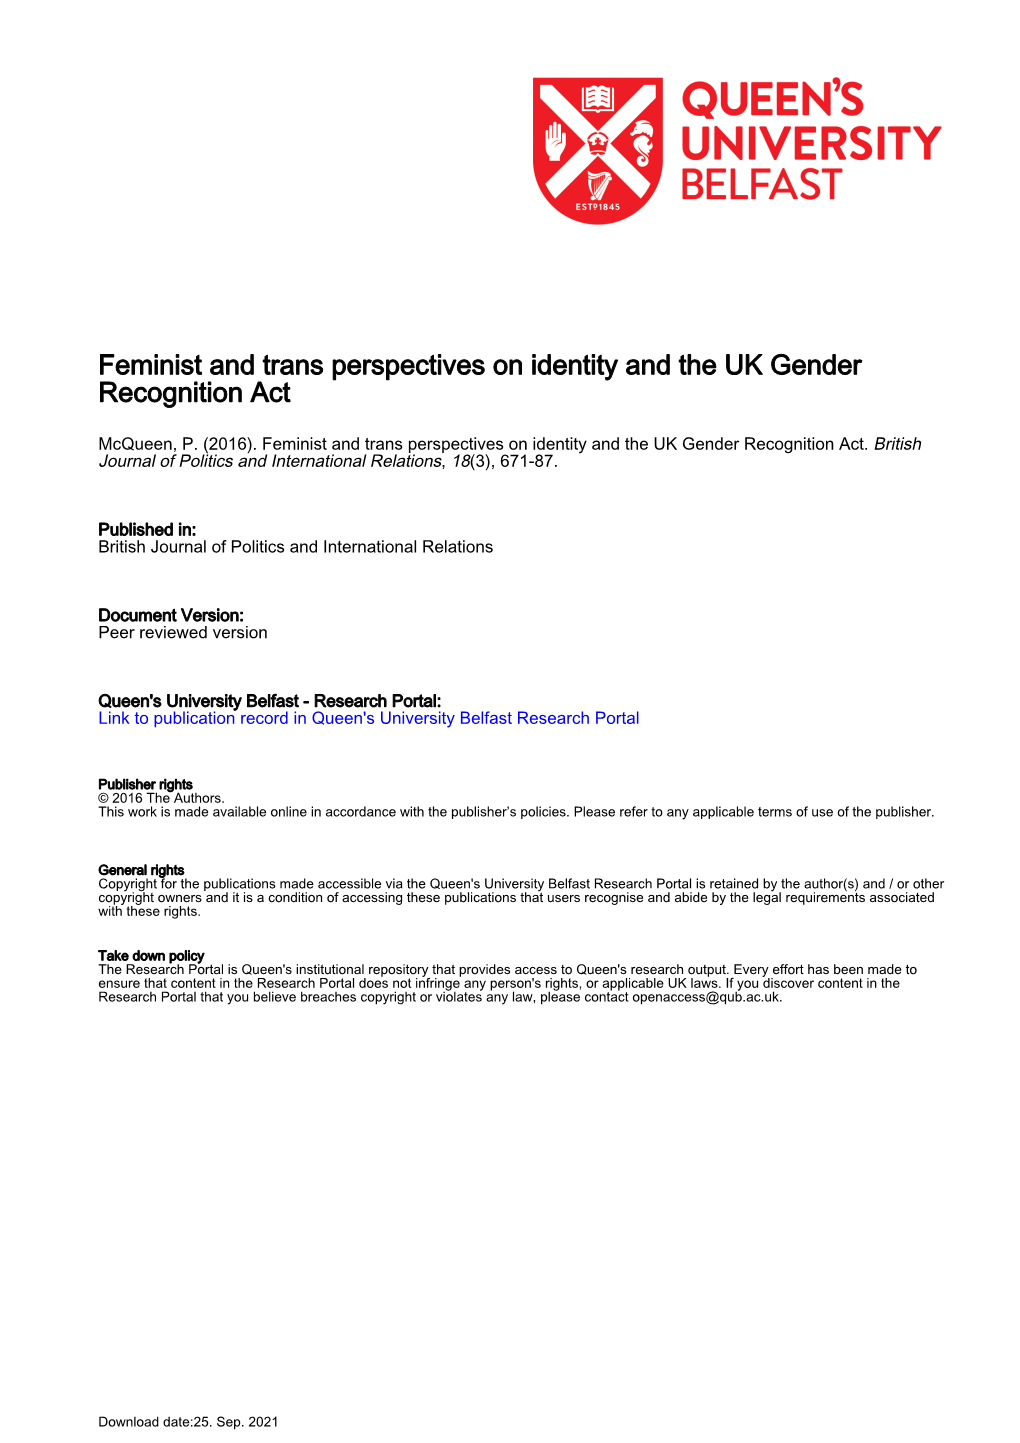 Feminist and Trans Perspectives on Identity and the UK Gender Recognition Act